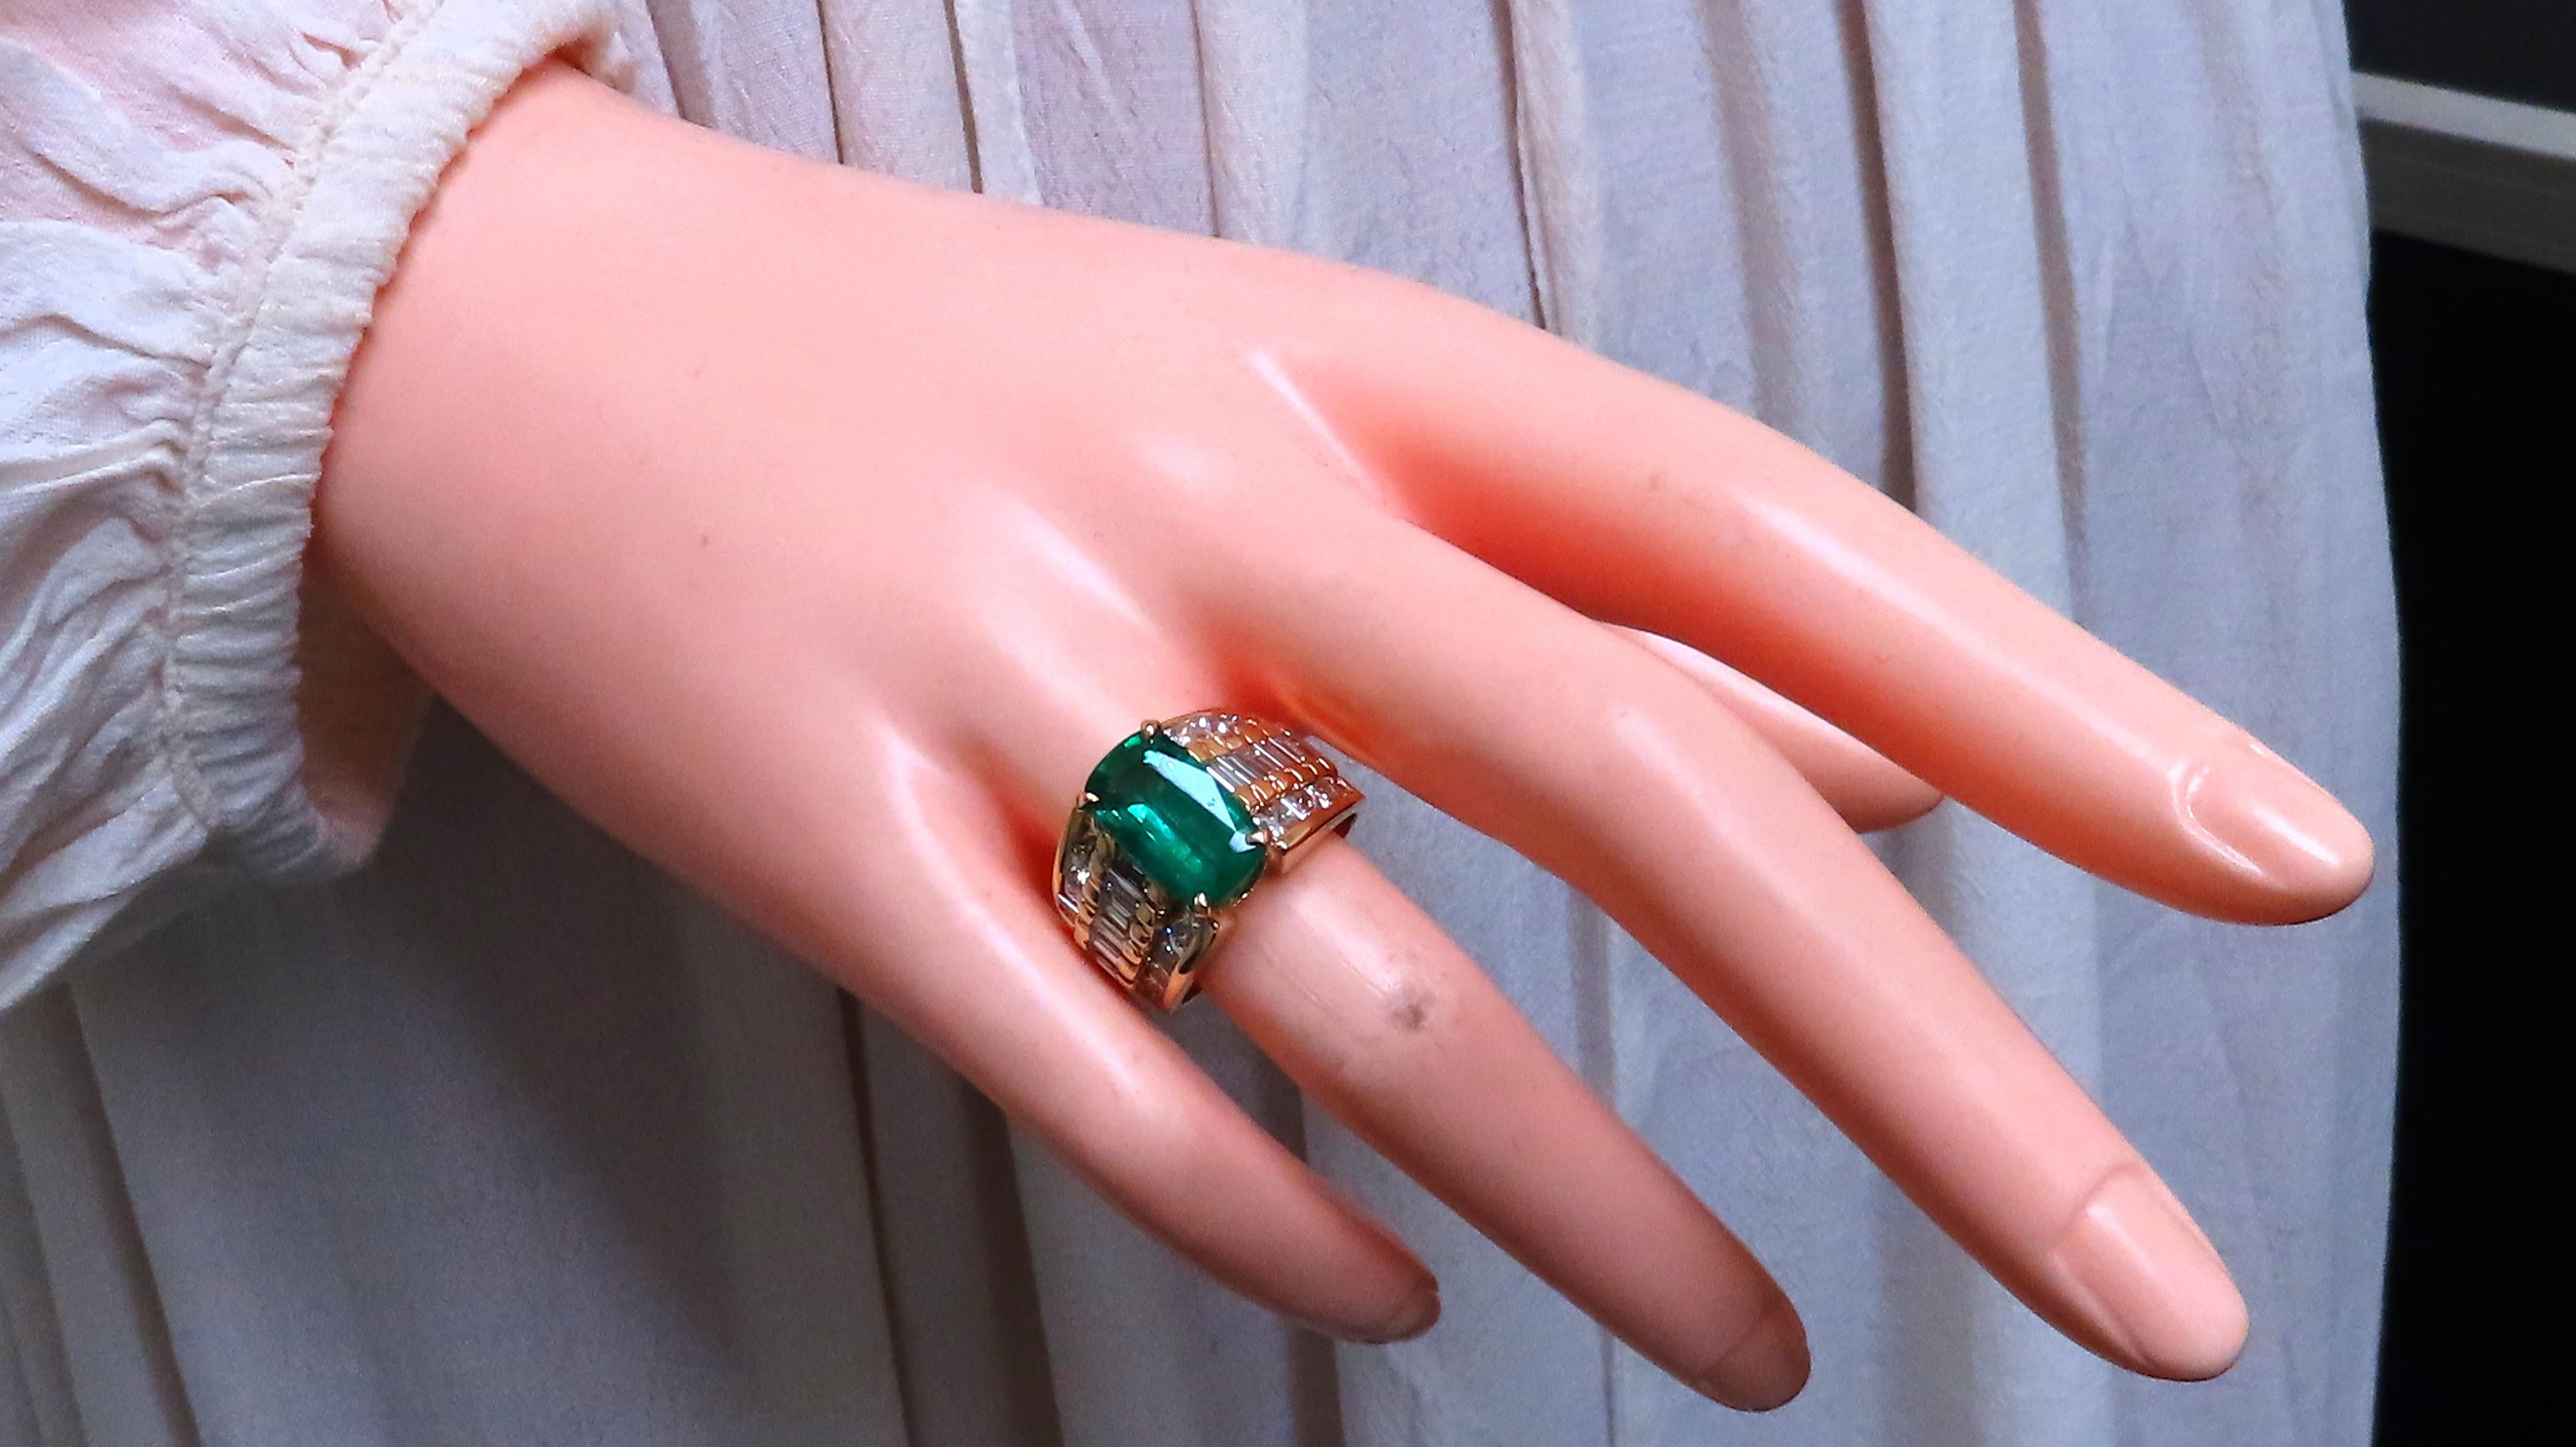 GIA Certified 3.01ct Natural Emerald Diamonds Ring 14kt Gold 12360 For Sale 1